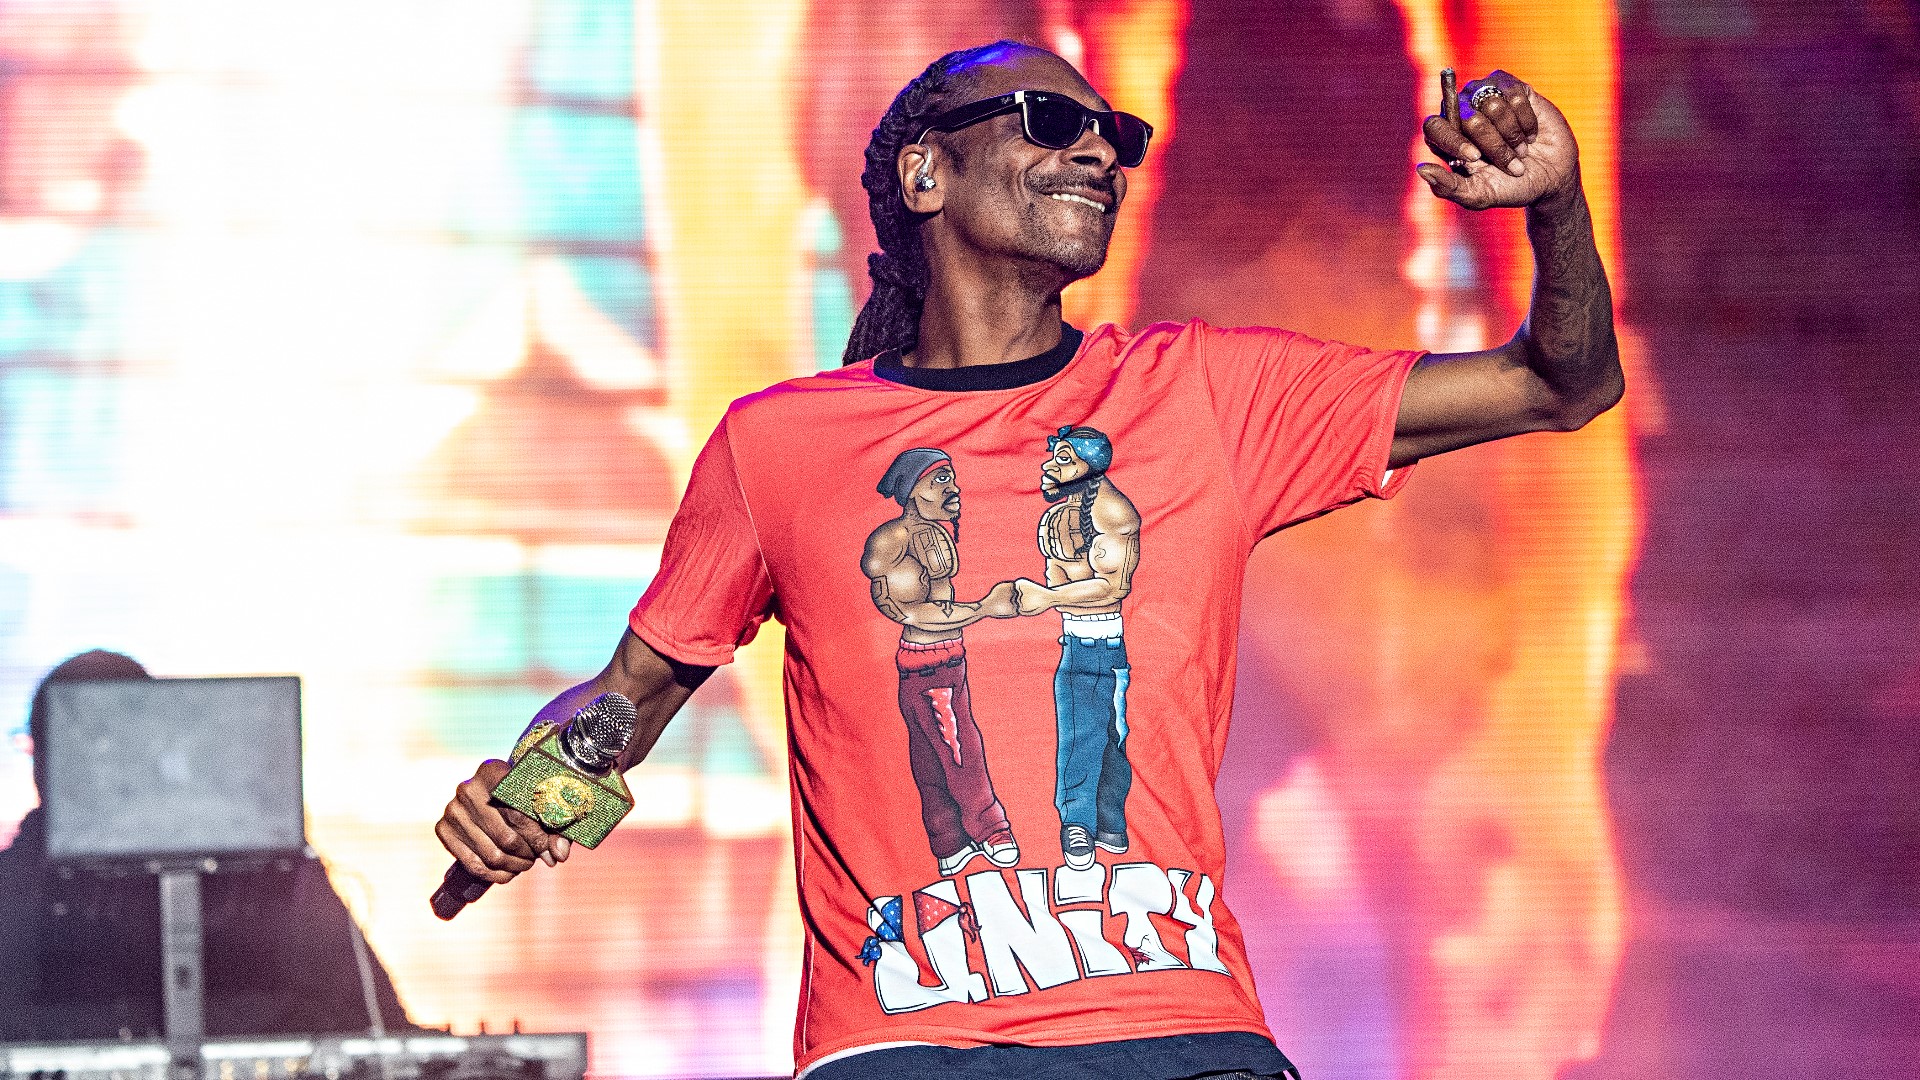 Snoop Dogg set to perform in Tampa Bay on December 29